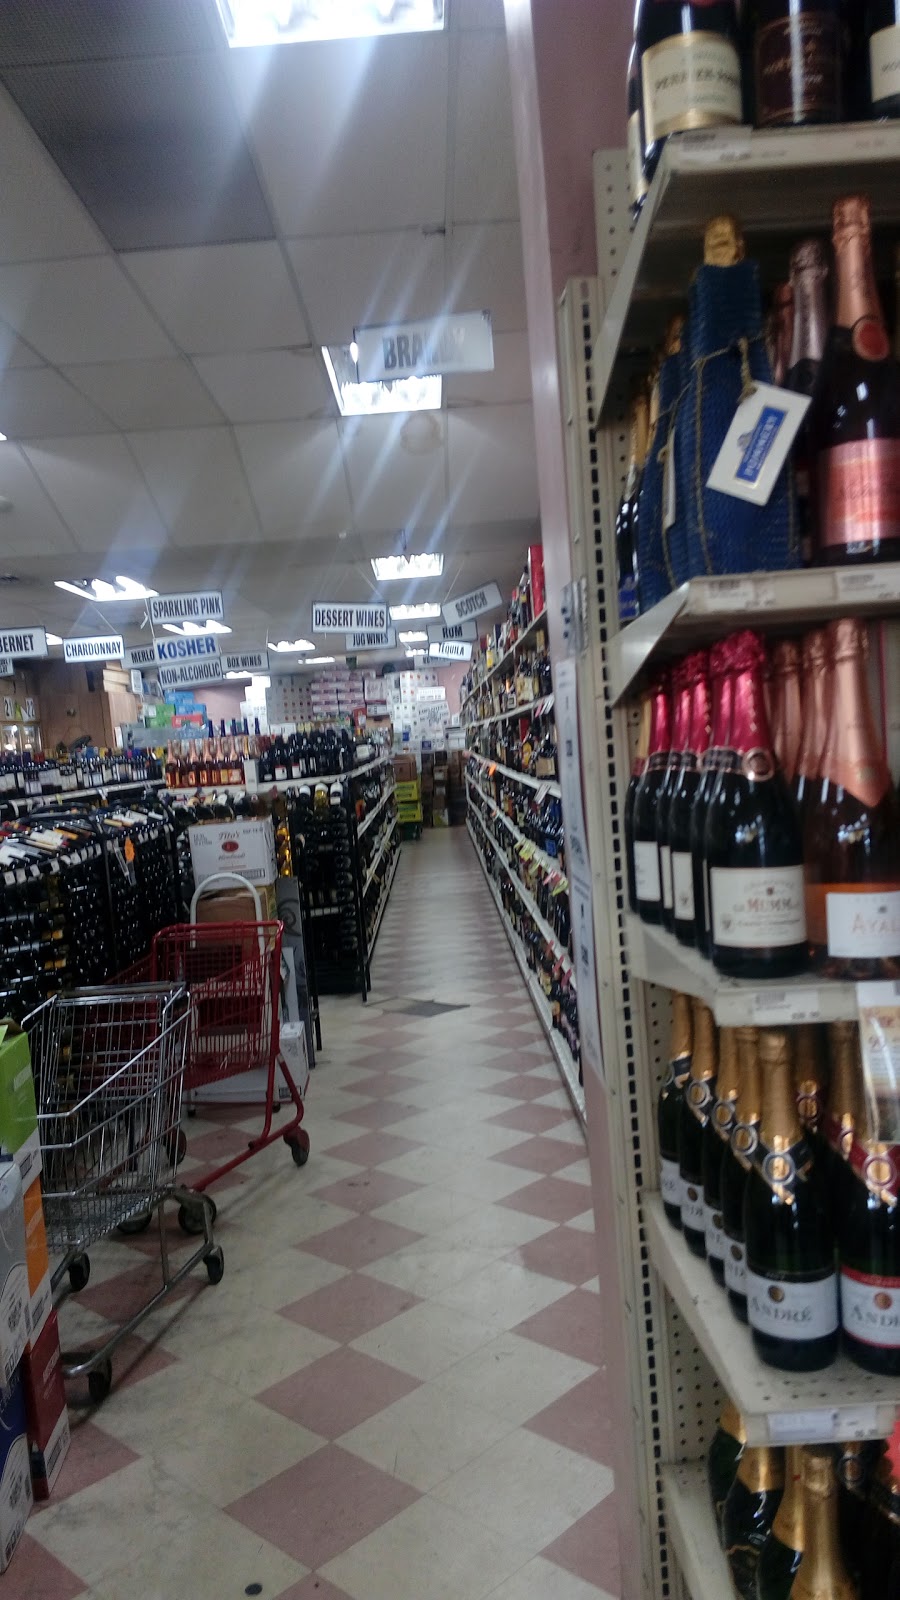 Liquor World | 535 Whalley Ave, New Haven, CT 06511 | Phone: (203) 397-0221